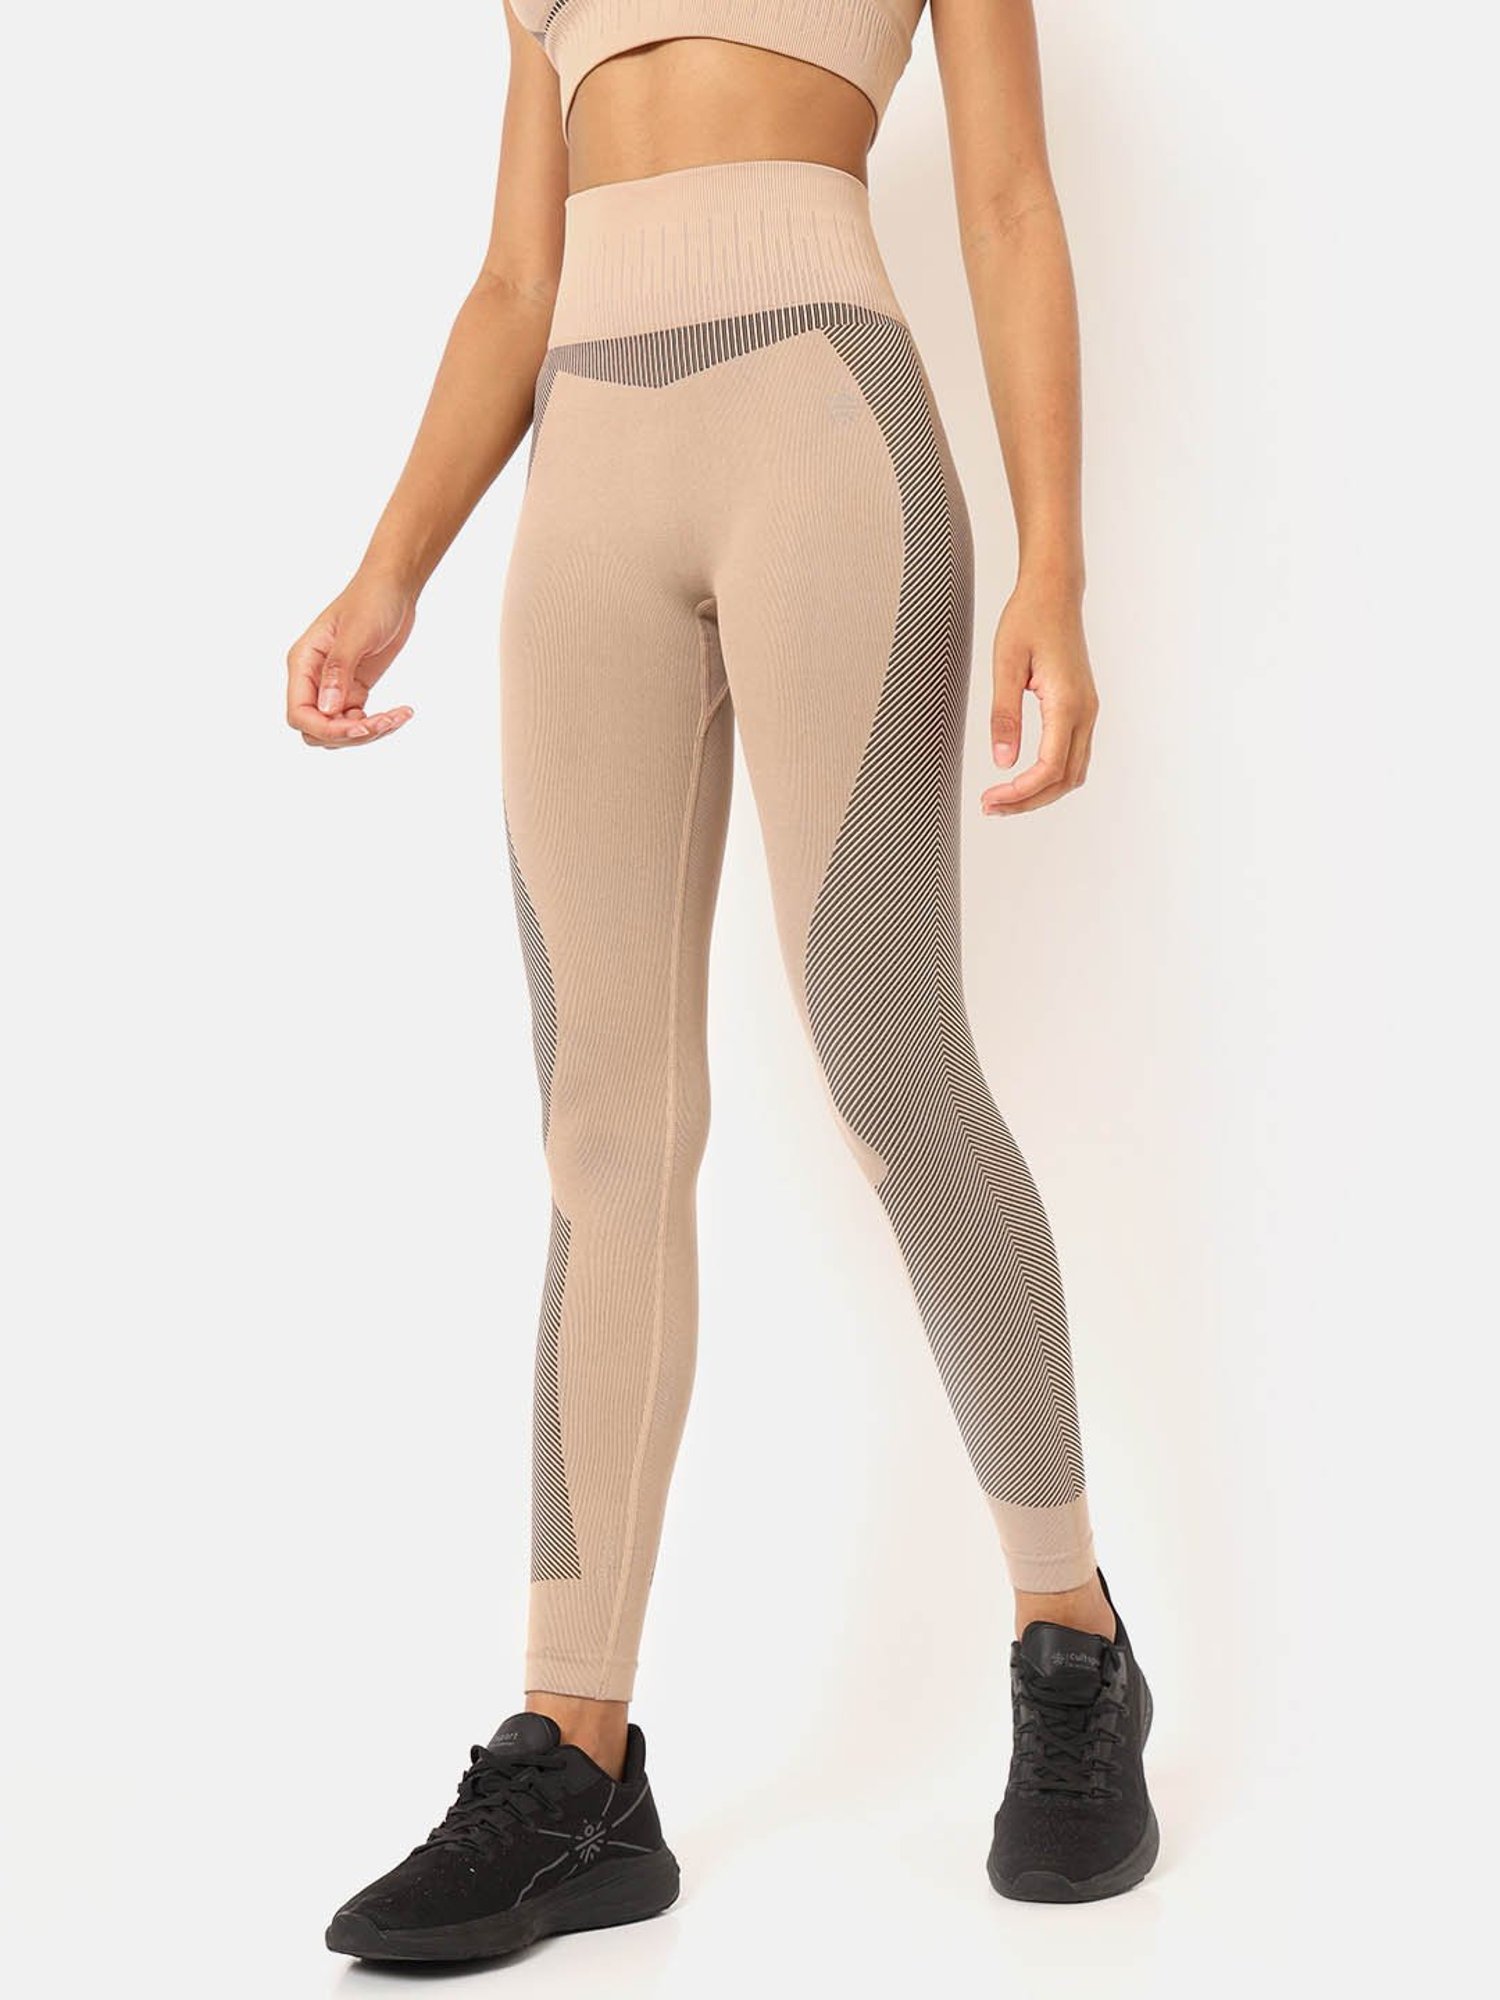 Buy AbsoluteFit Power Workout Tights for Women Online